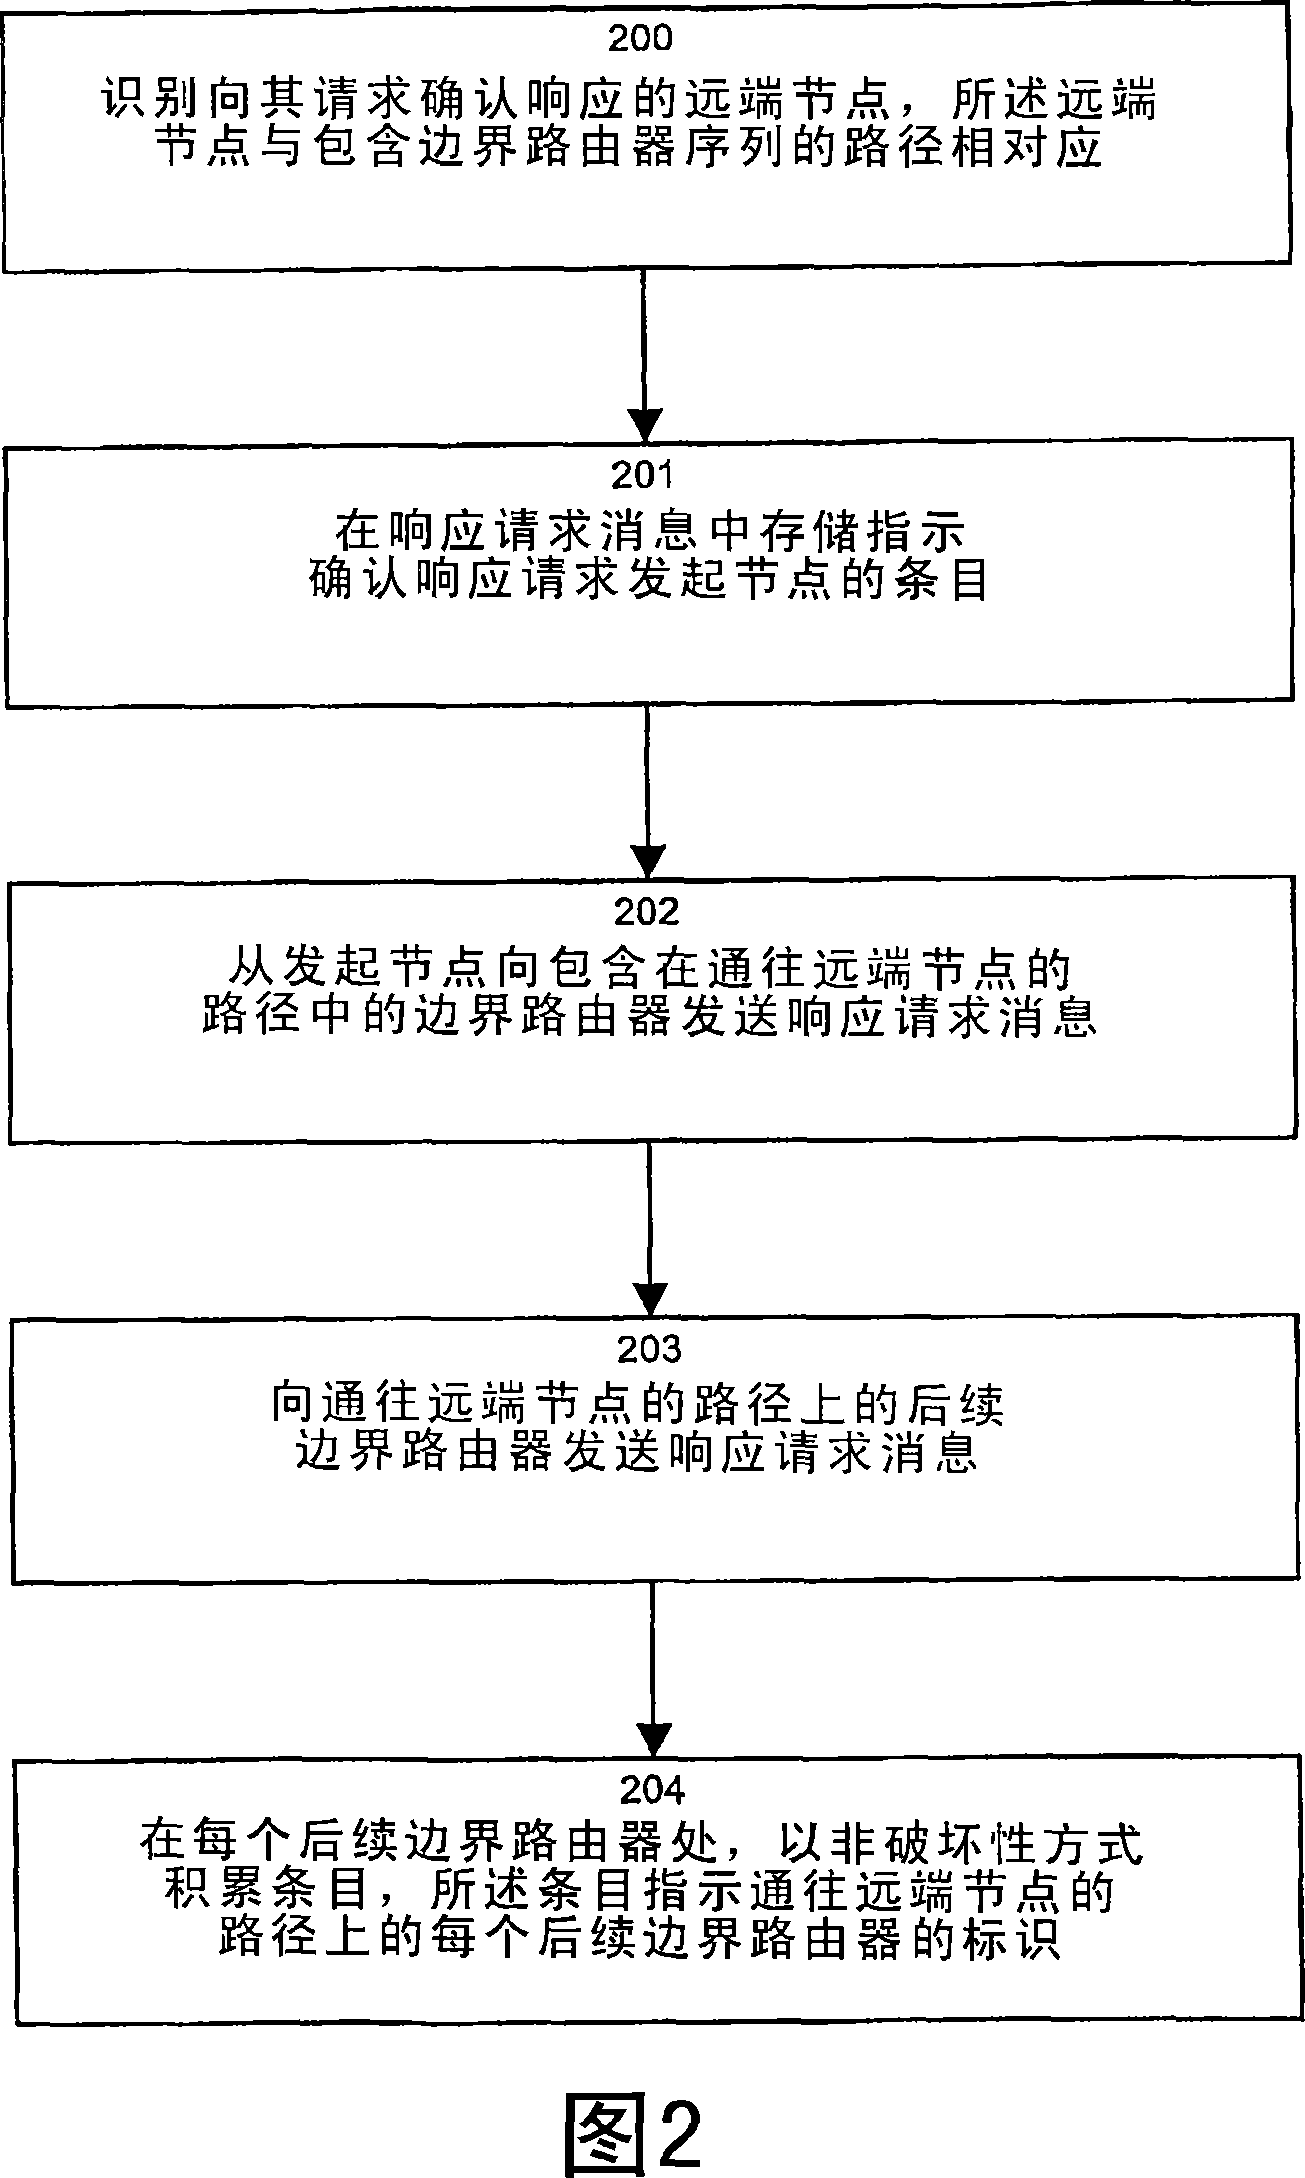 System and methods for network reachability detection